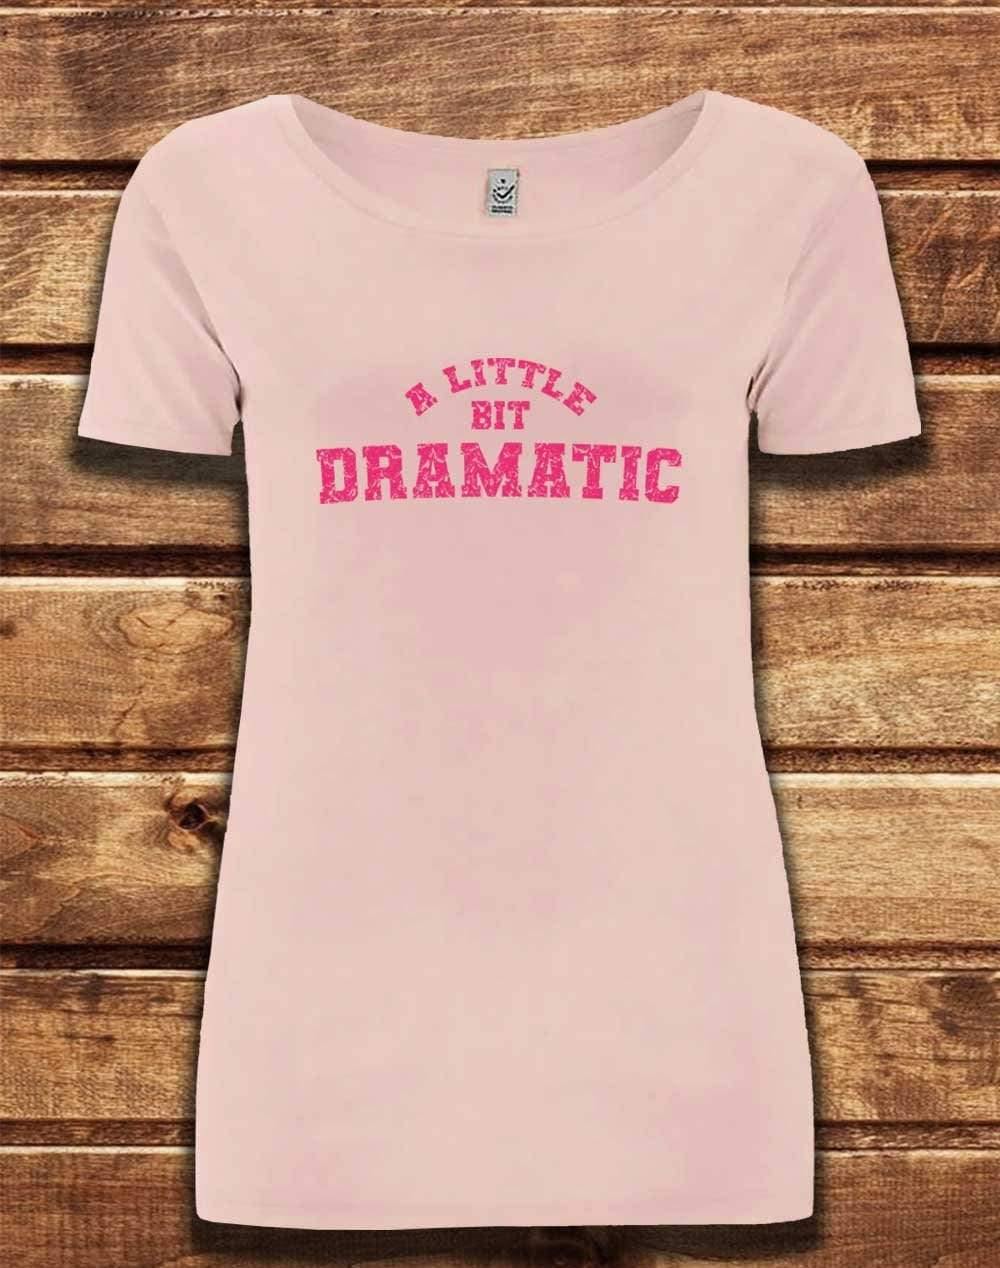 DELUXE A Little Bit Dramatic Distressed Organic Scoop Neck T-Shirt 8-10 / Light Pink  - Off World Tees